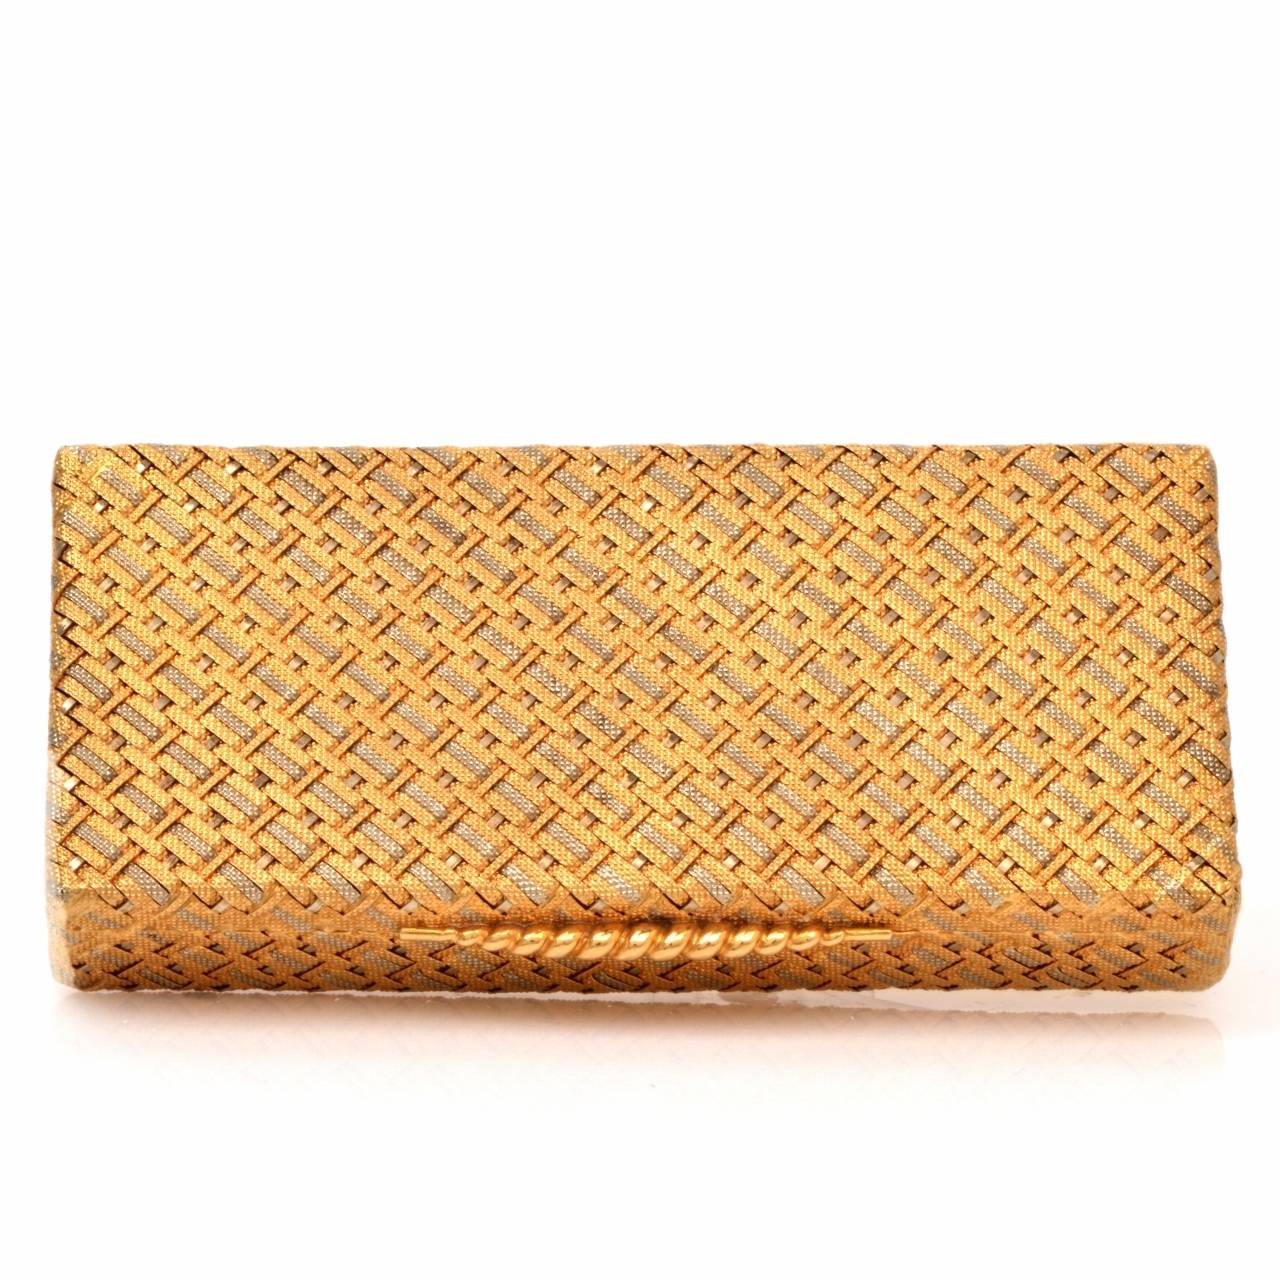 This Van Cleef & Arpels cigarette / snuffbox of unsurpassed elegance and immaculate craftsmanship is of French provenance, crafted in solid 18K textured gold, simulating a basket weave pattern. It weighs 70.2 grams and measures 3.5" x